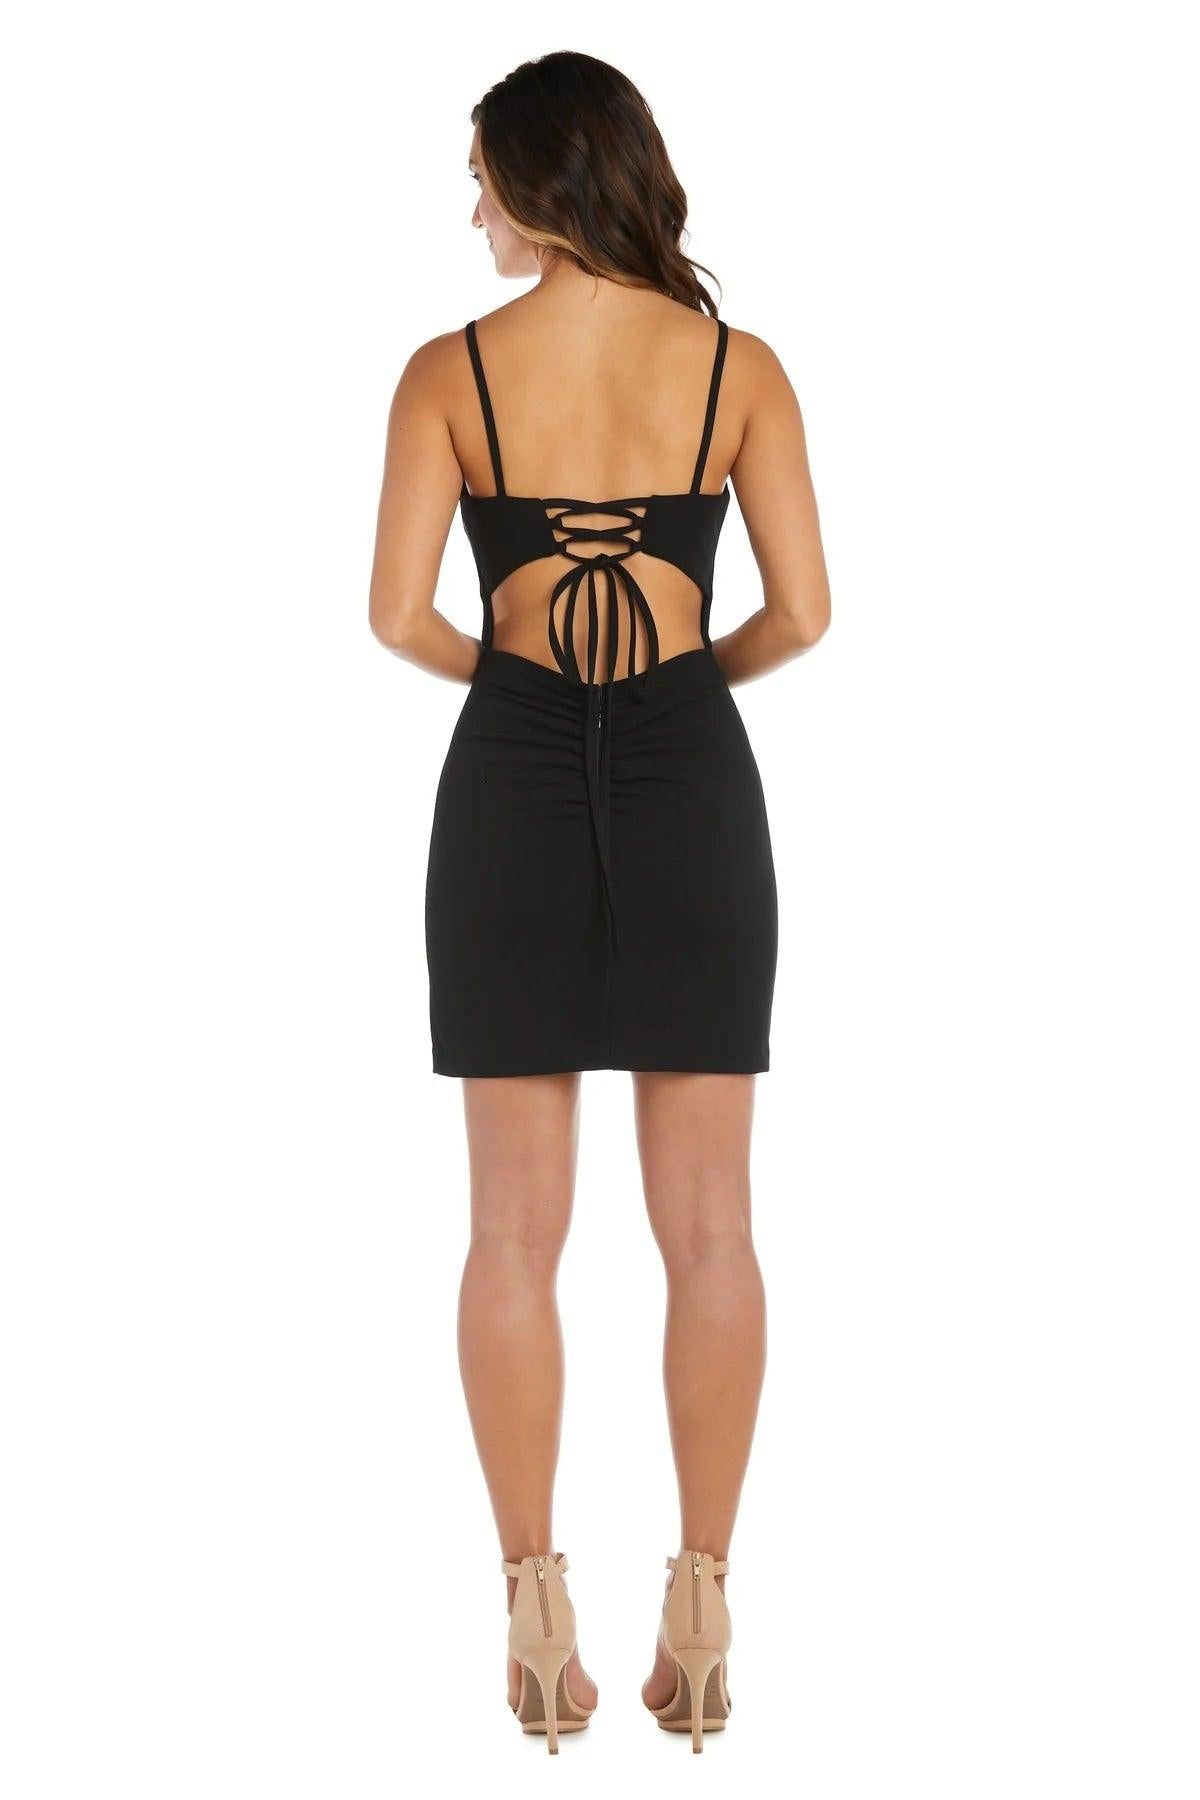 Morgan & Co Homecoming Short Cocktail Dress 13038 - The Dress Outlet